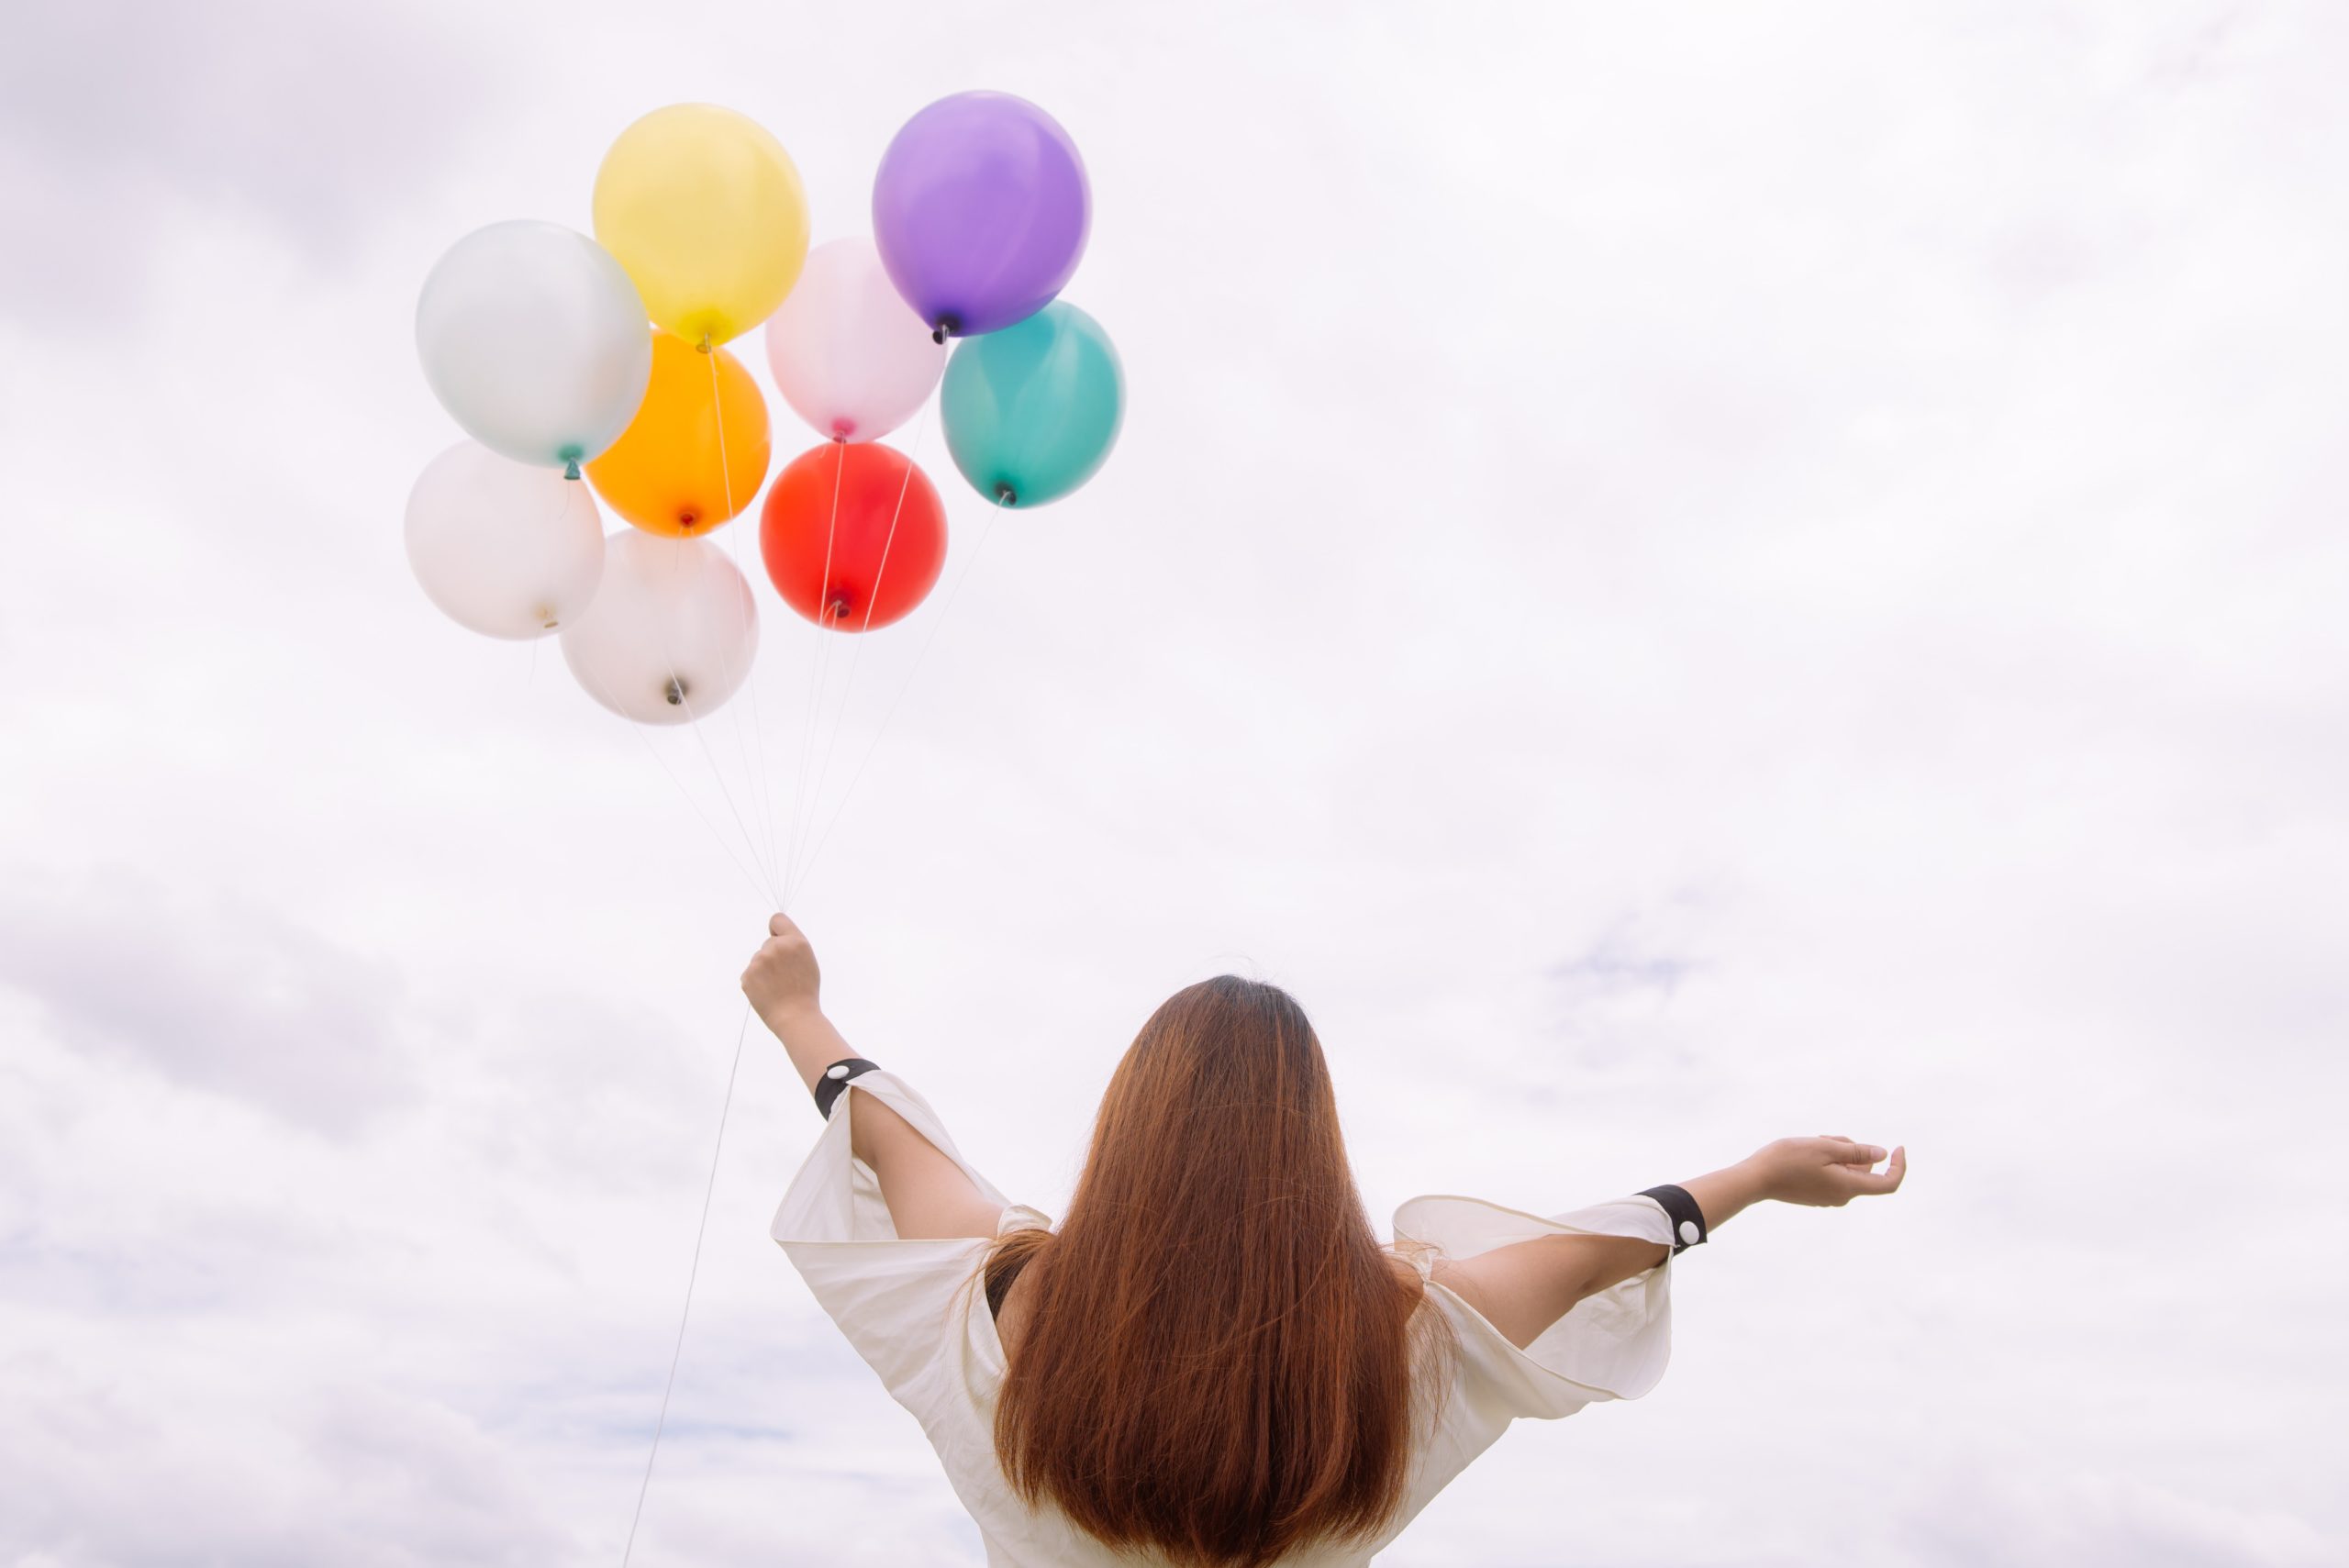 worm-s-eye-view-of-woman-holding-balloons-887824